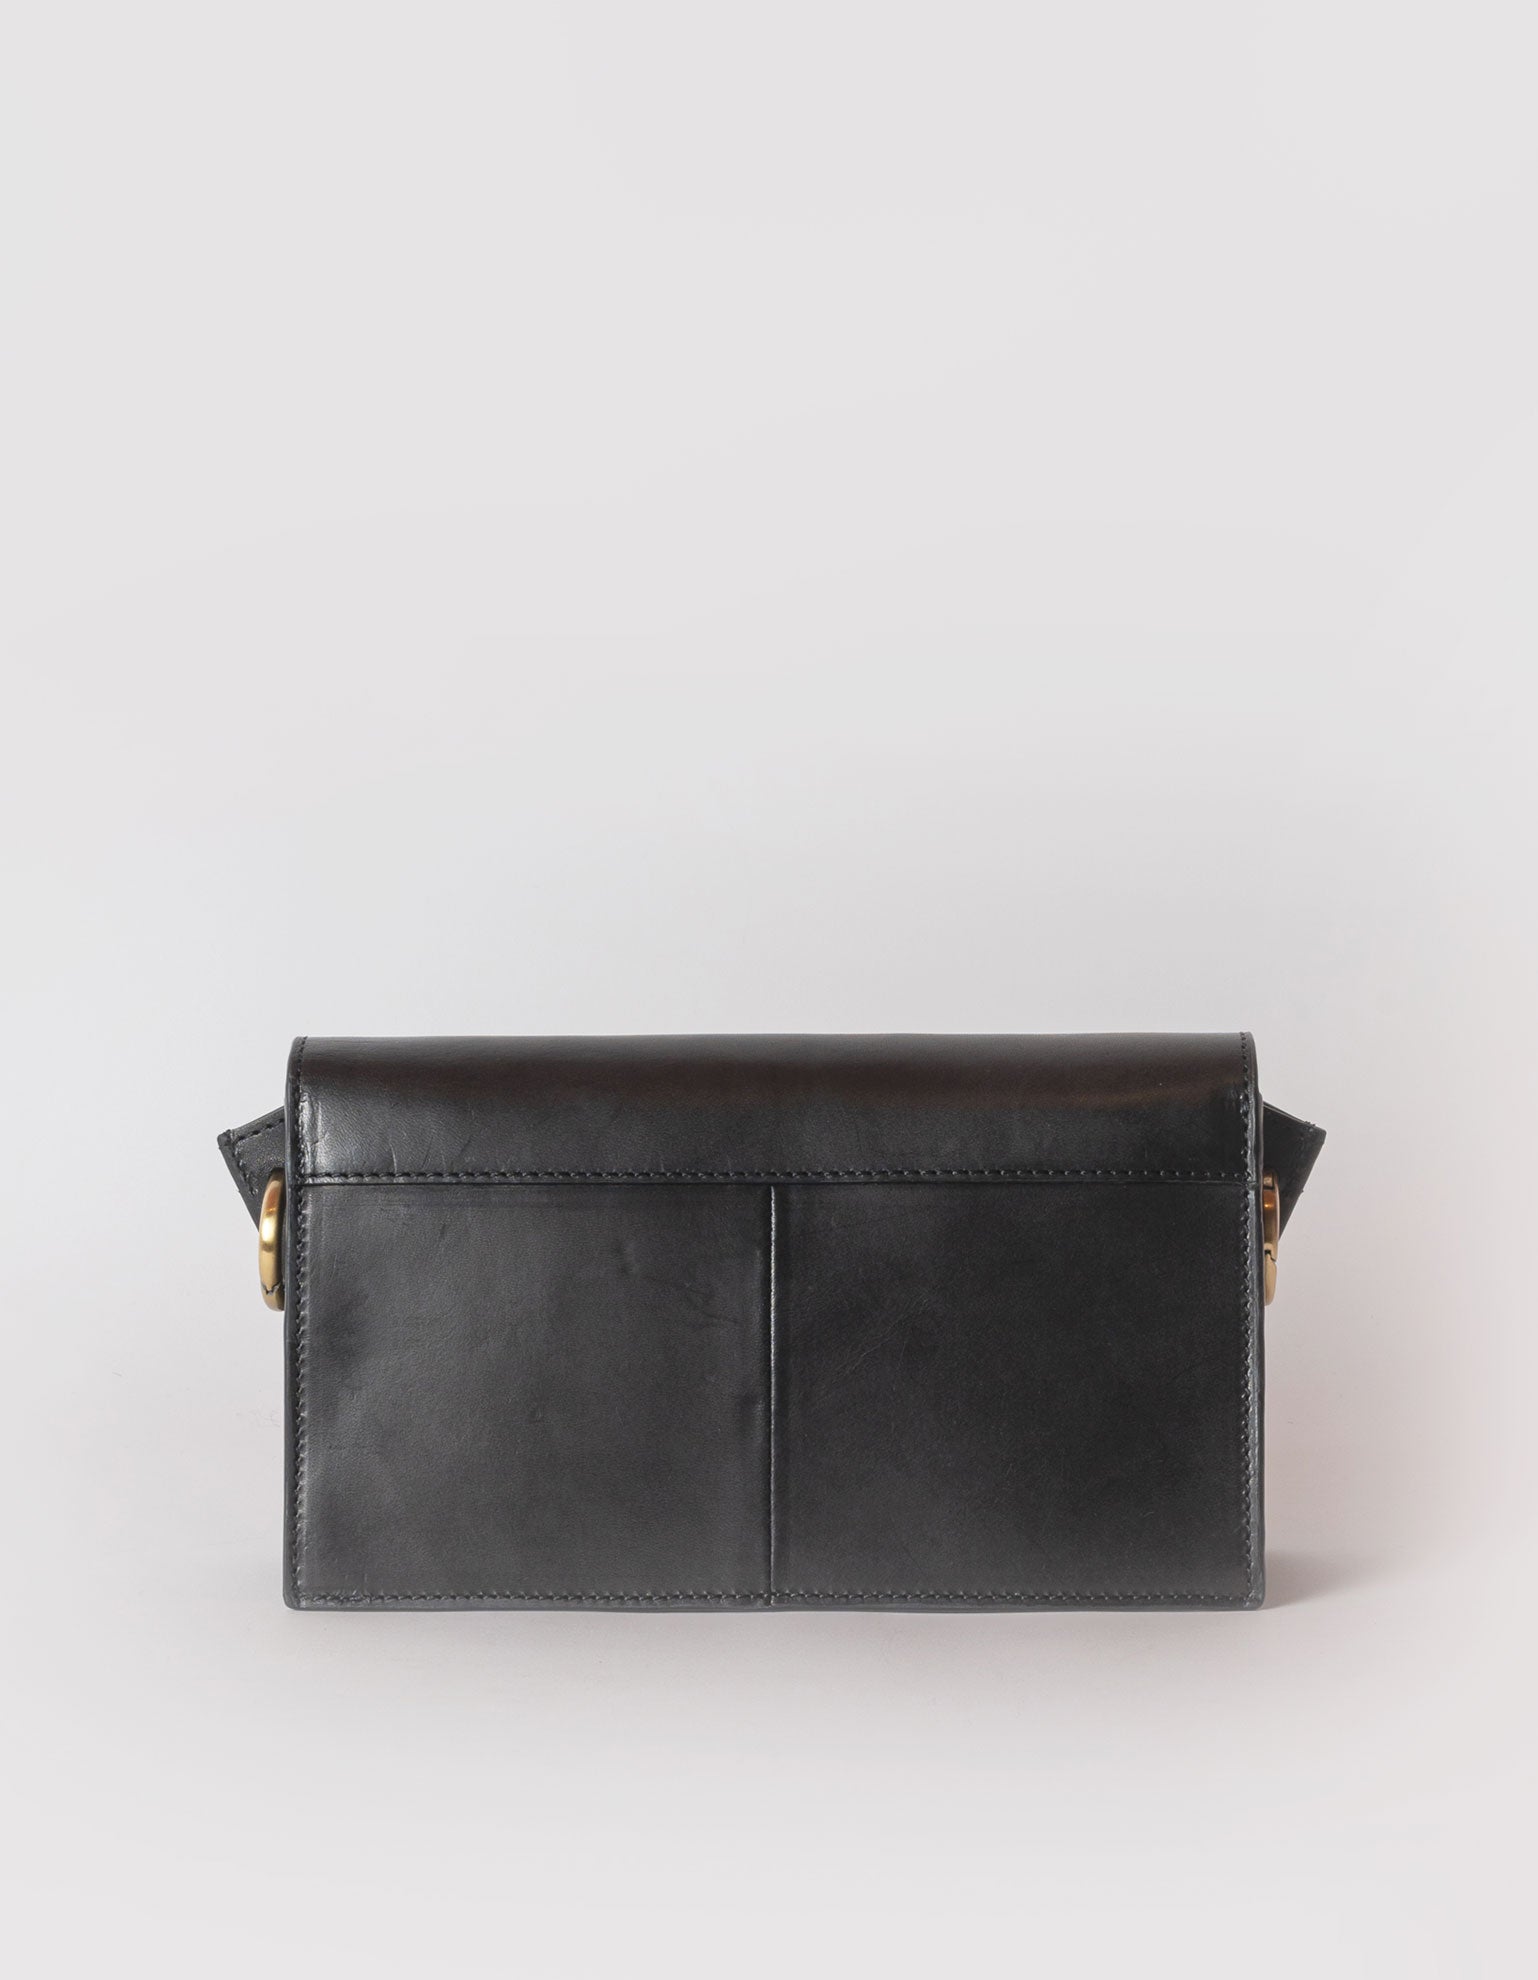 Stella in black classic leather without strap. Back product image.